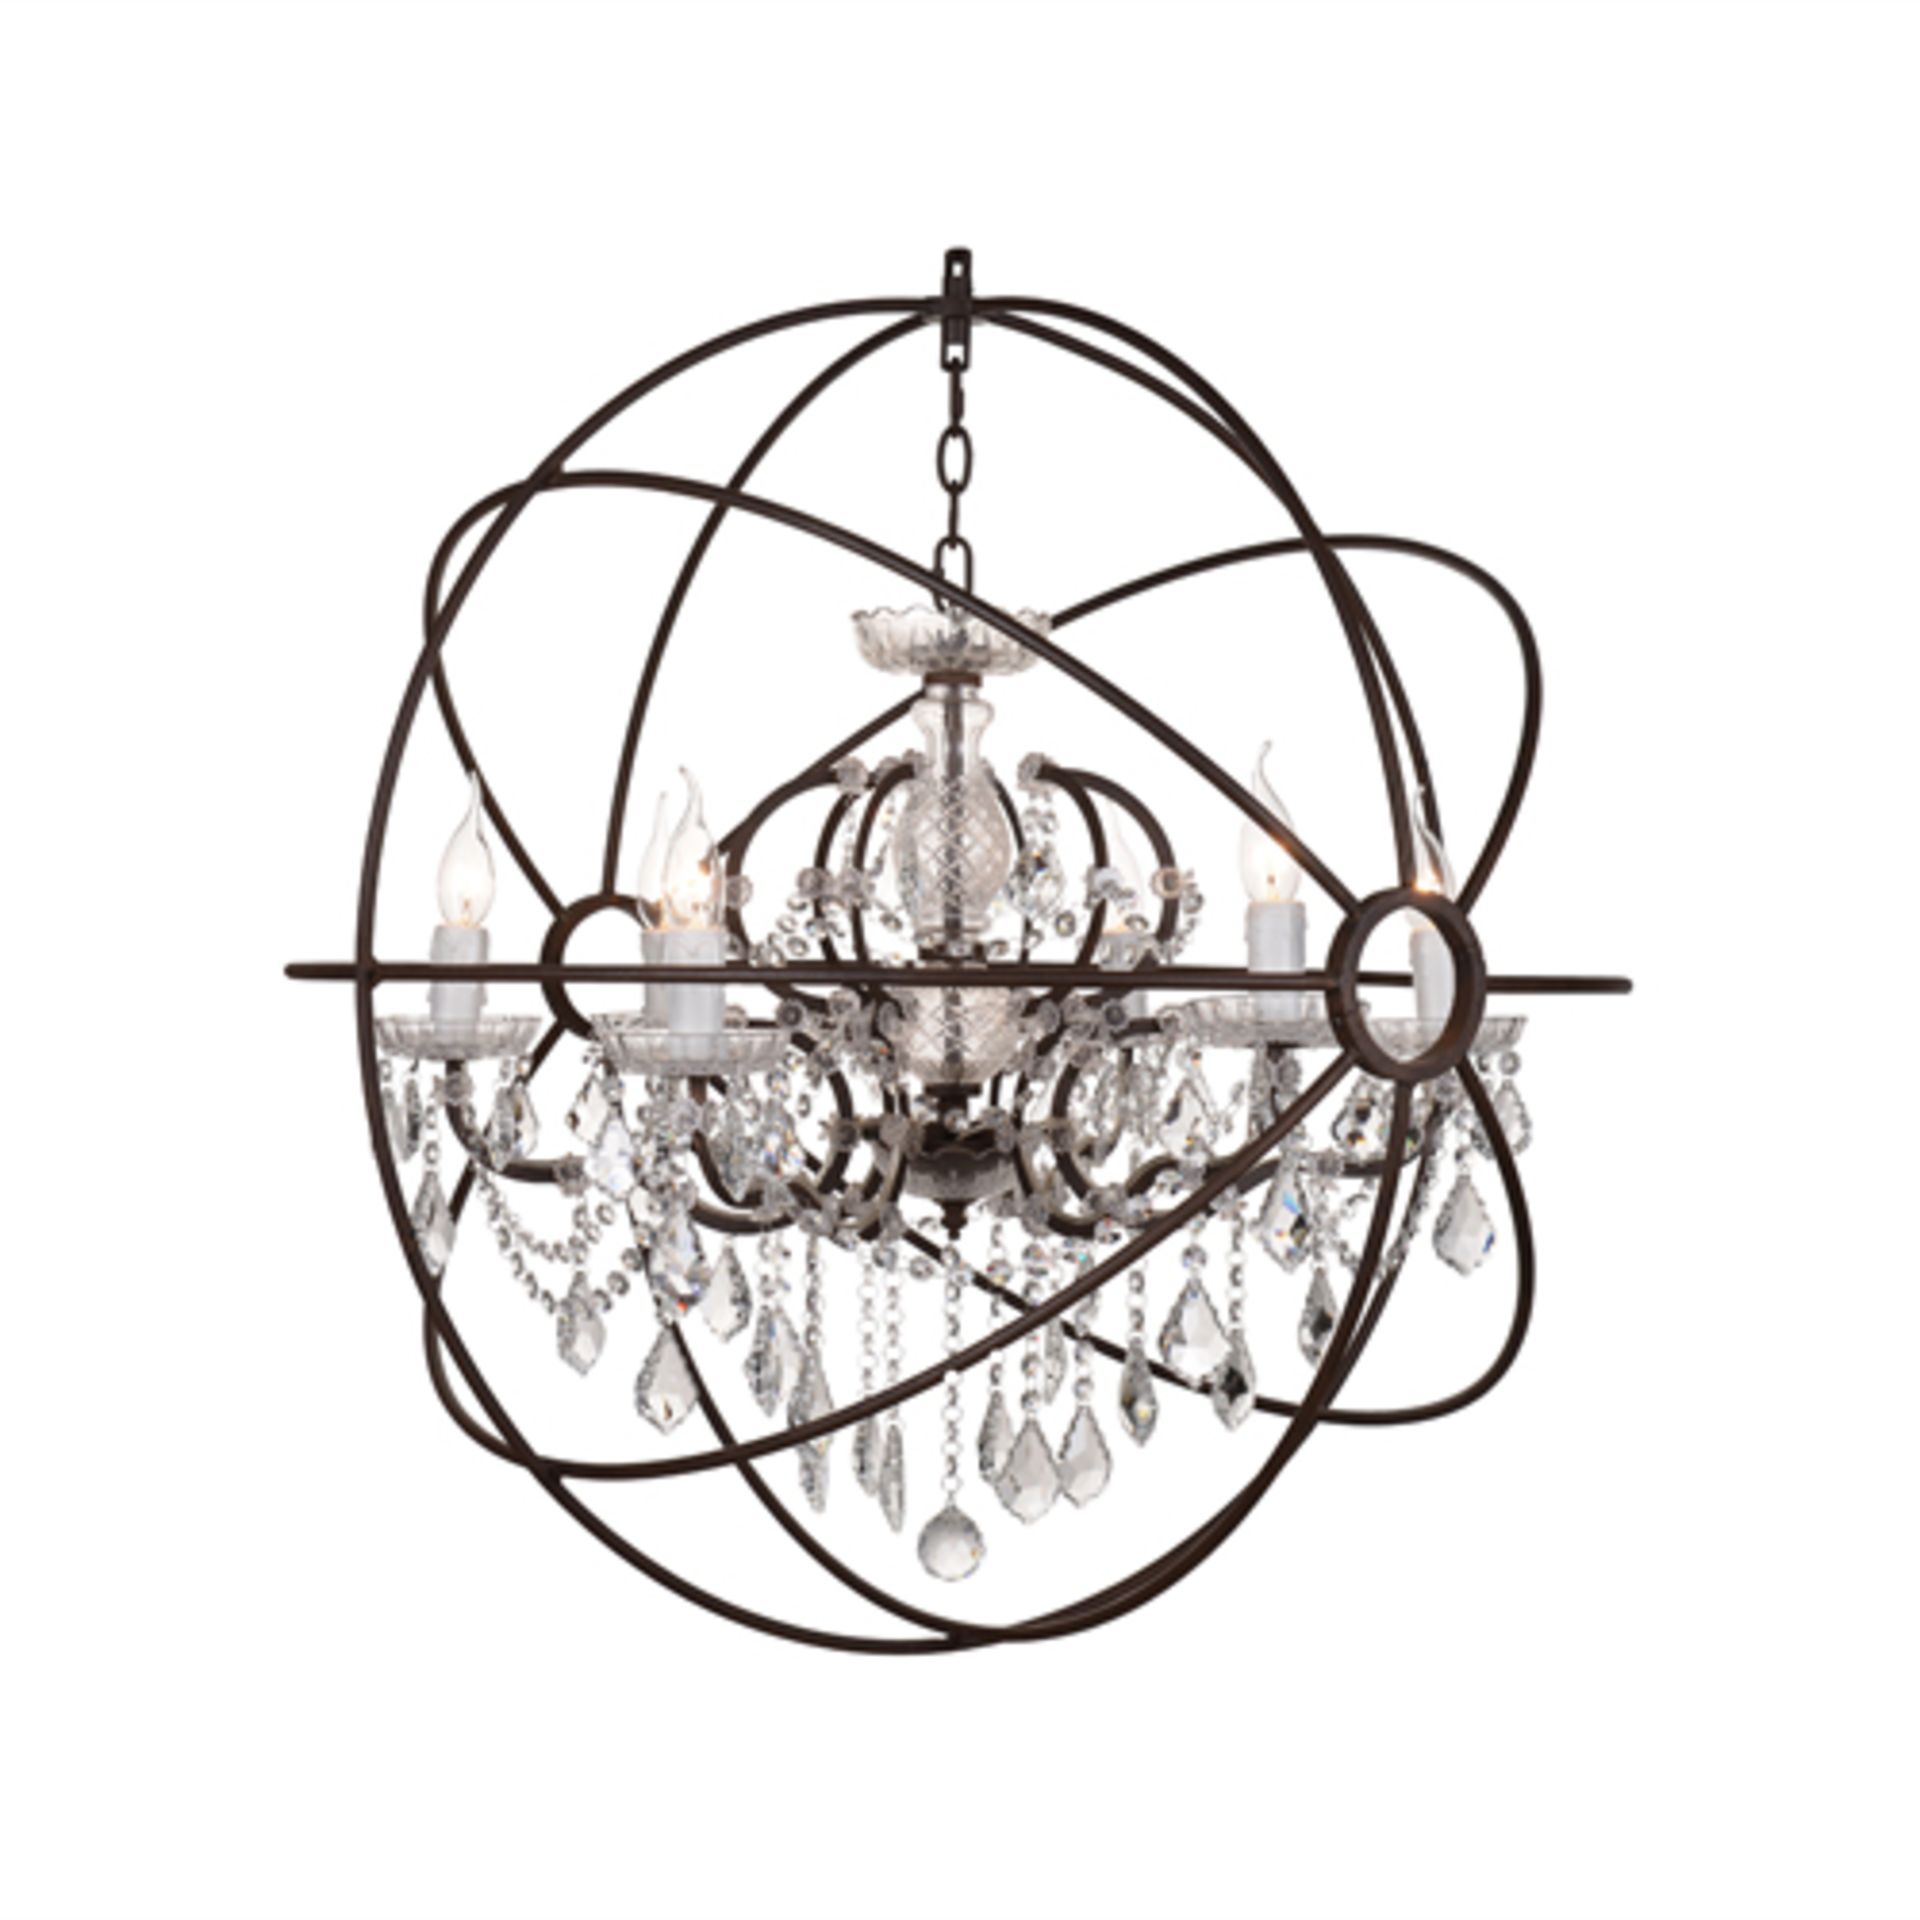 Gyro Crystal Medium Chandelier The Gyro Lighting Collection Is Inspired By Nineteenth Century